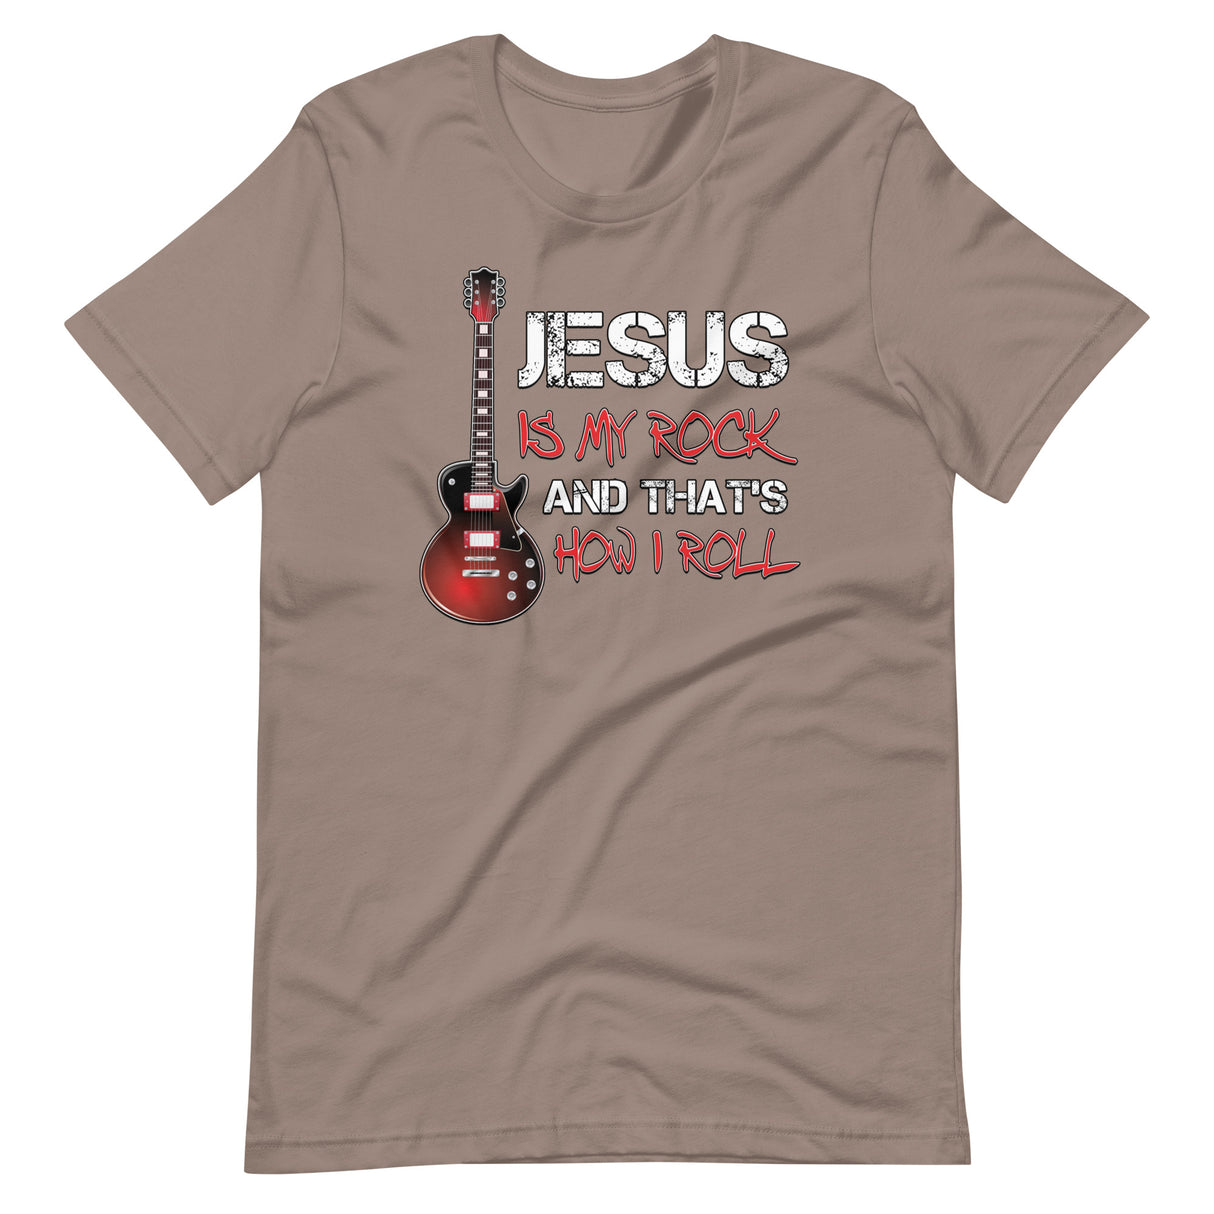 Jesus is My Rock And That's How I Roll Shirt